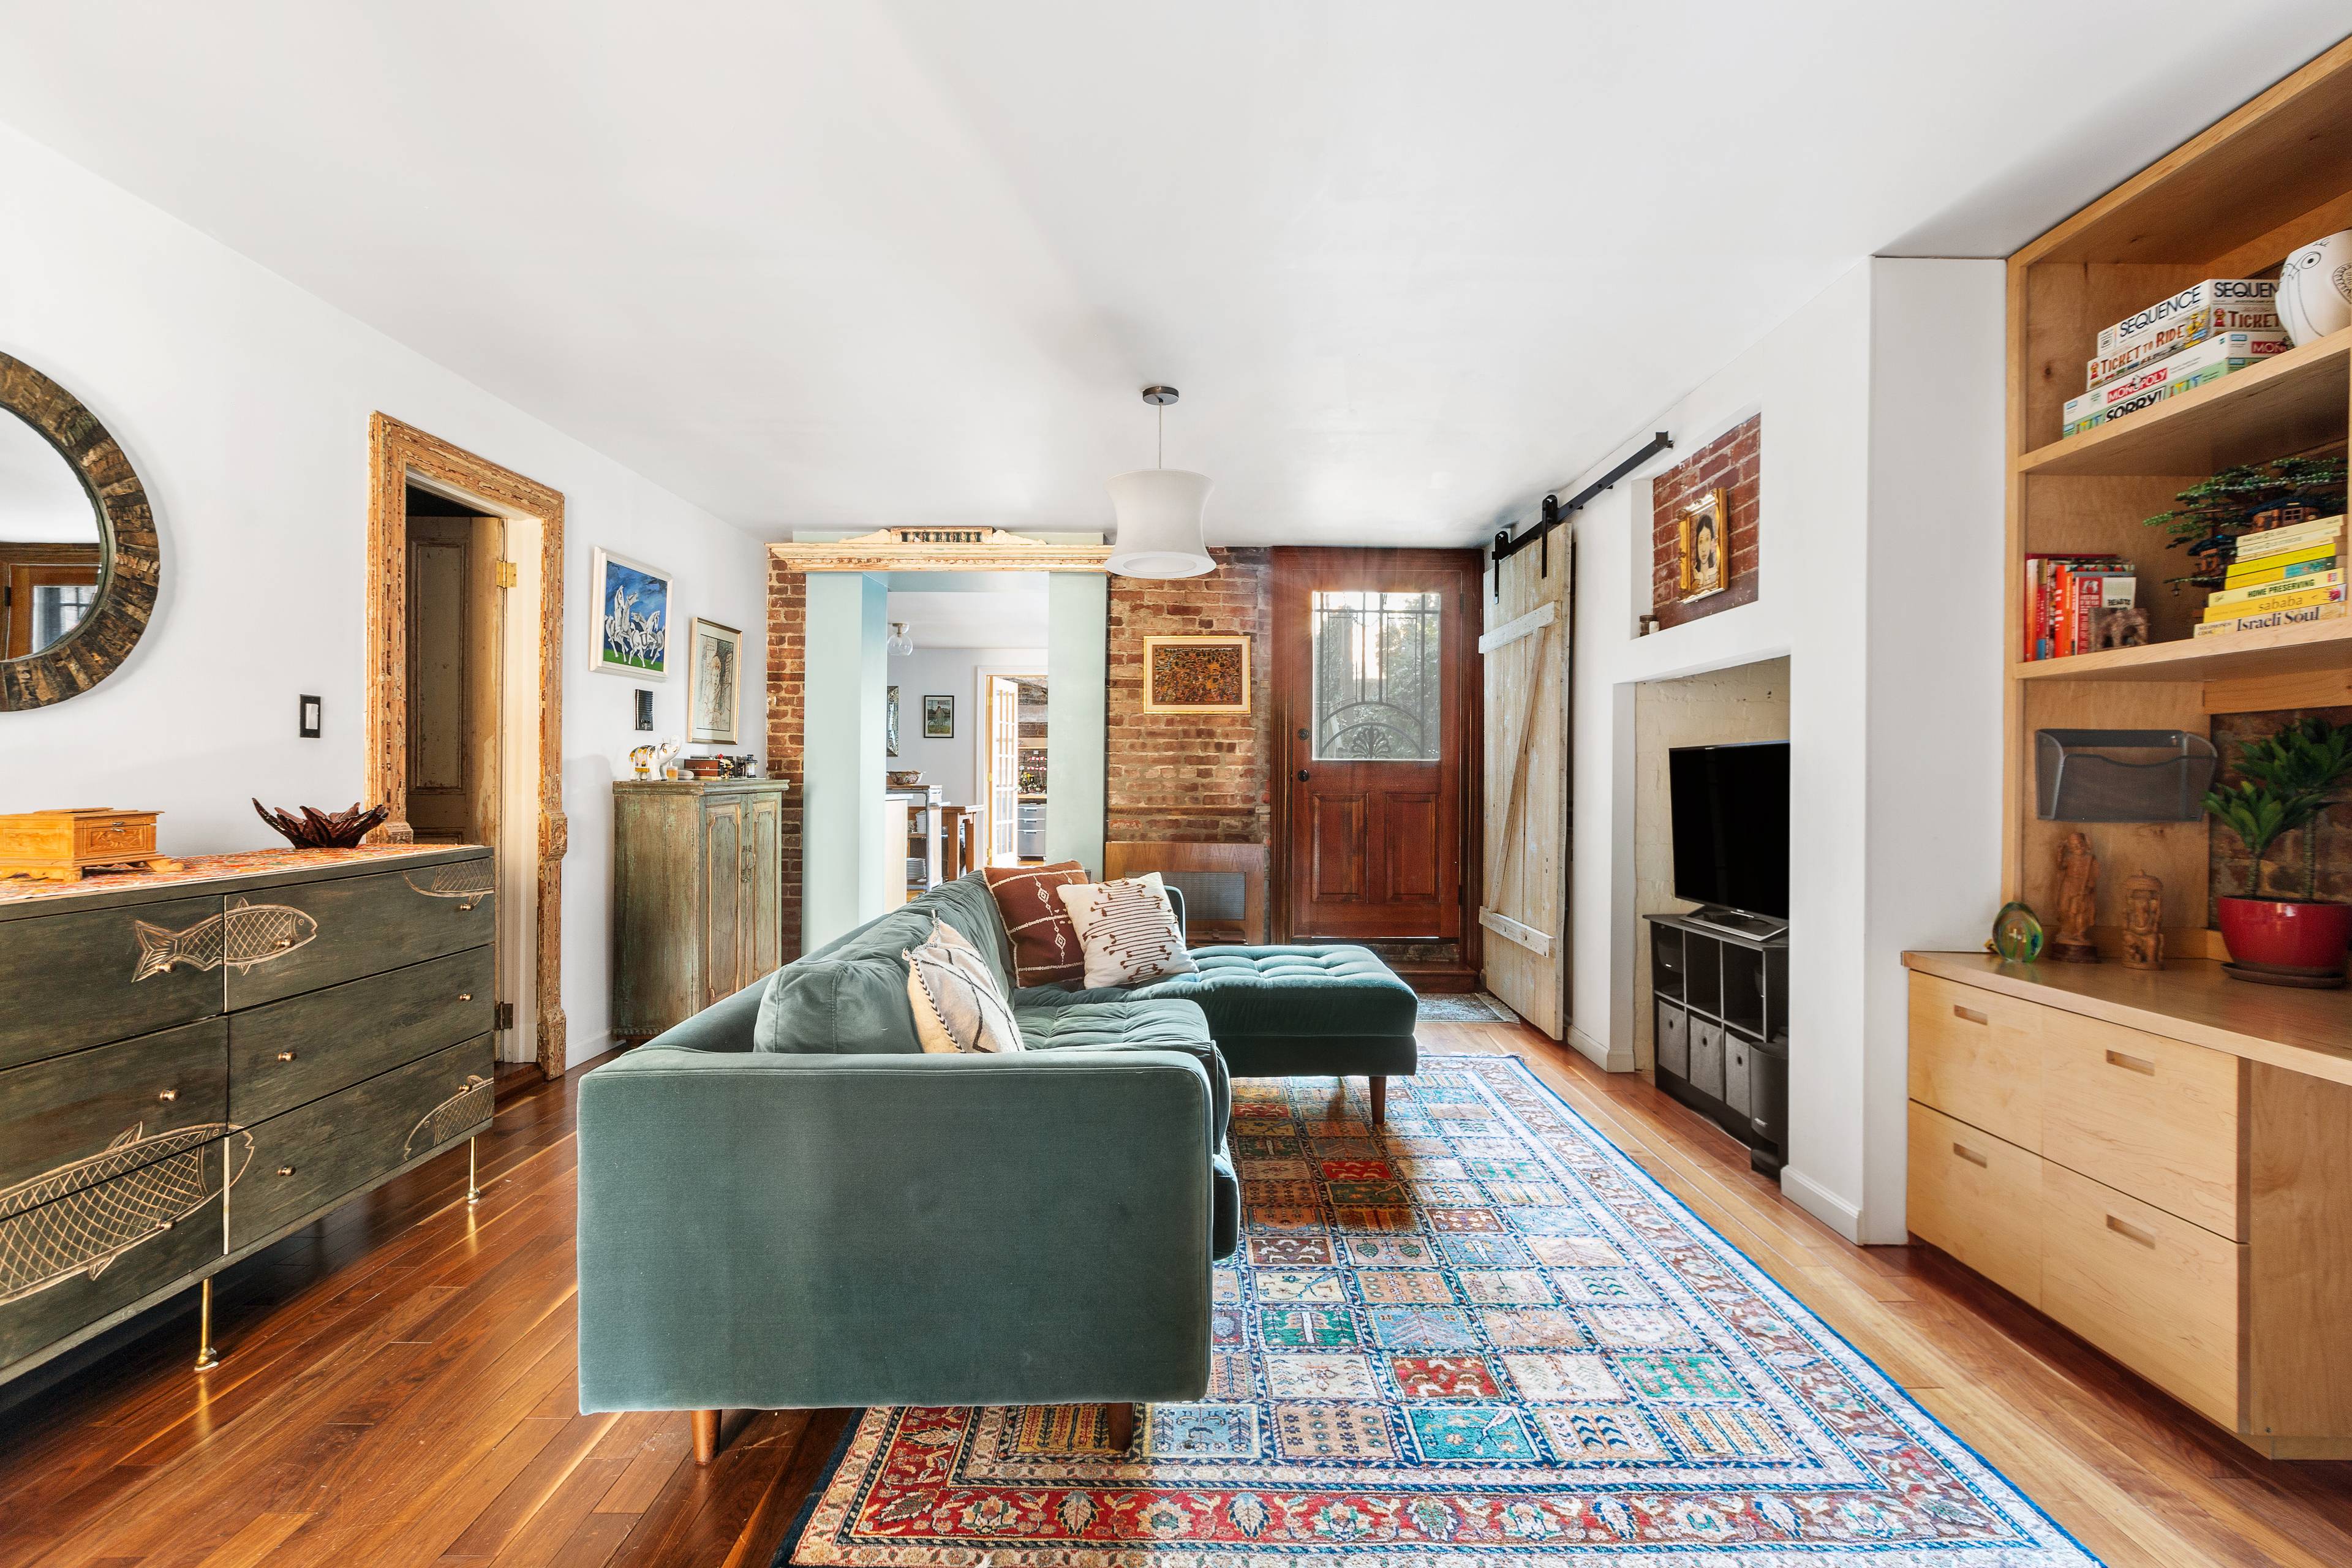 Welcome to 135 Clinton Ave, where classic brownstone meets bohemian living.